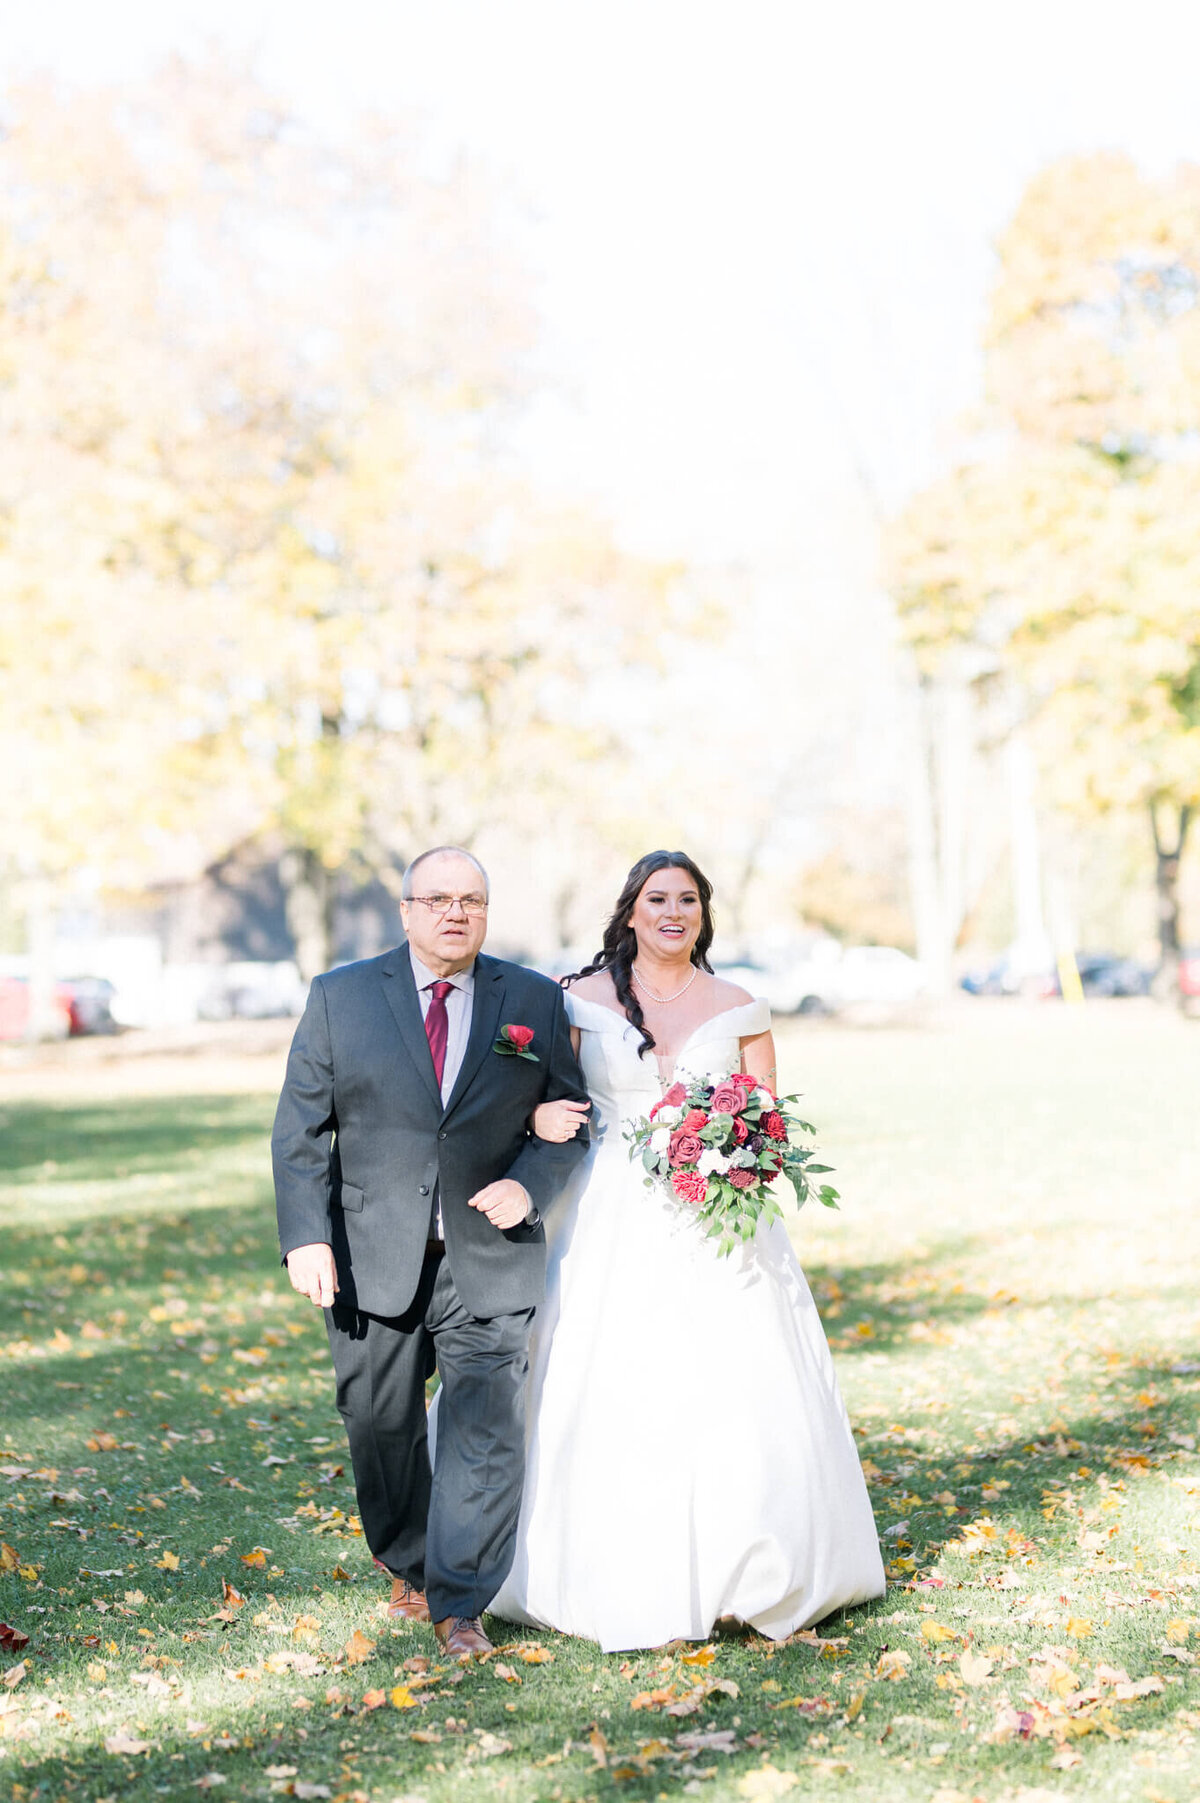 Bride walking with her father down the aisle at her Toronto wedding